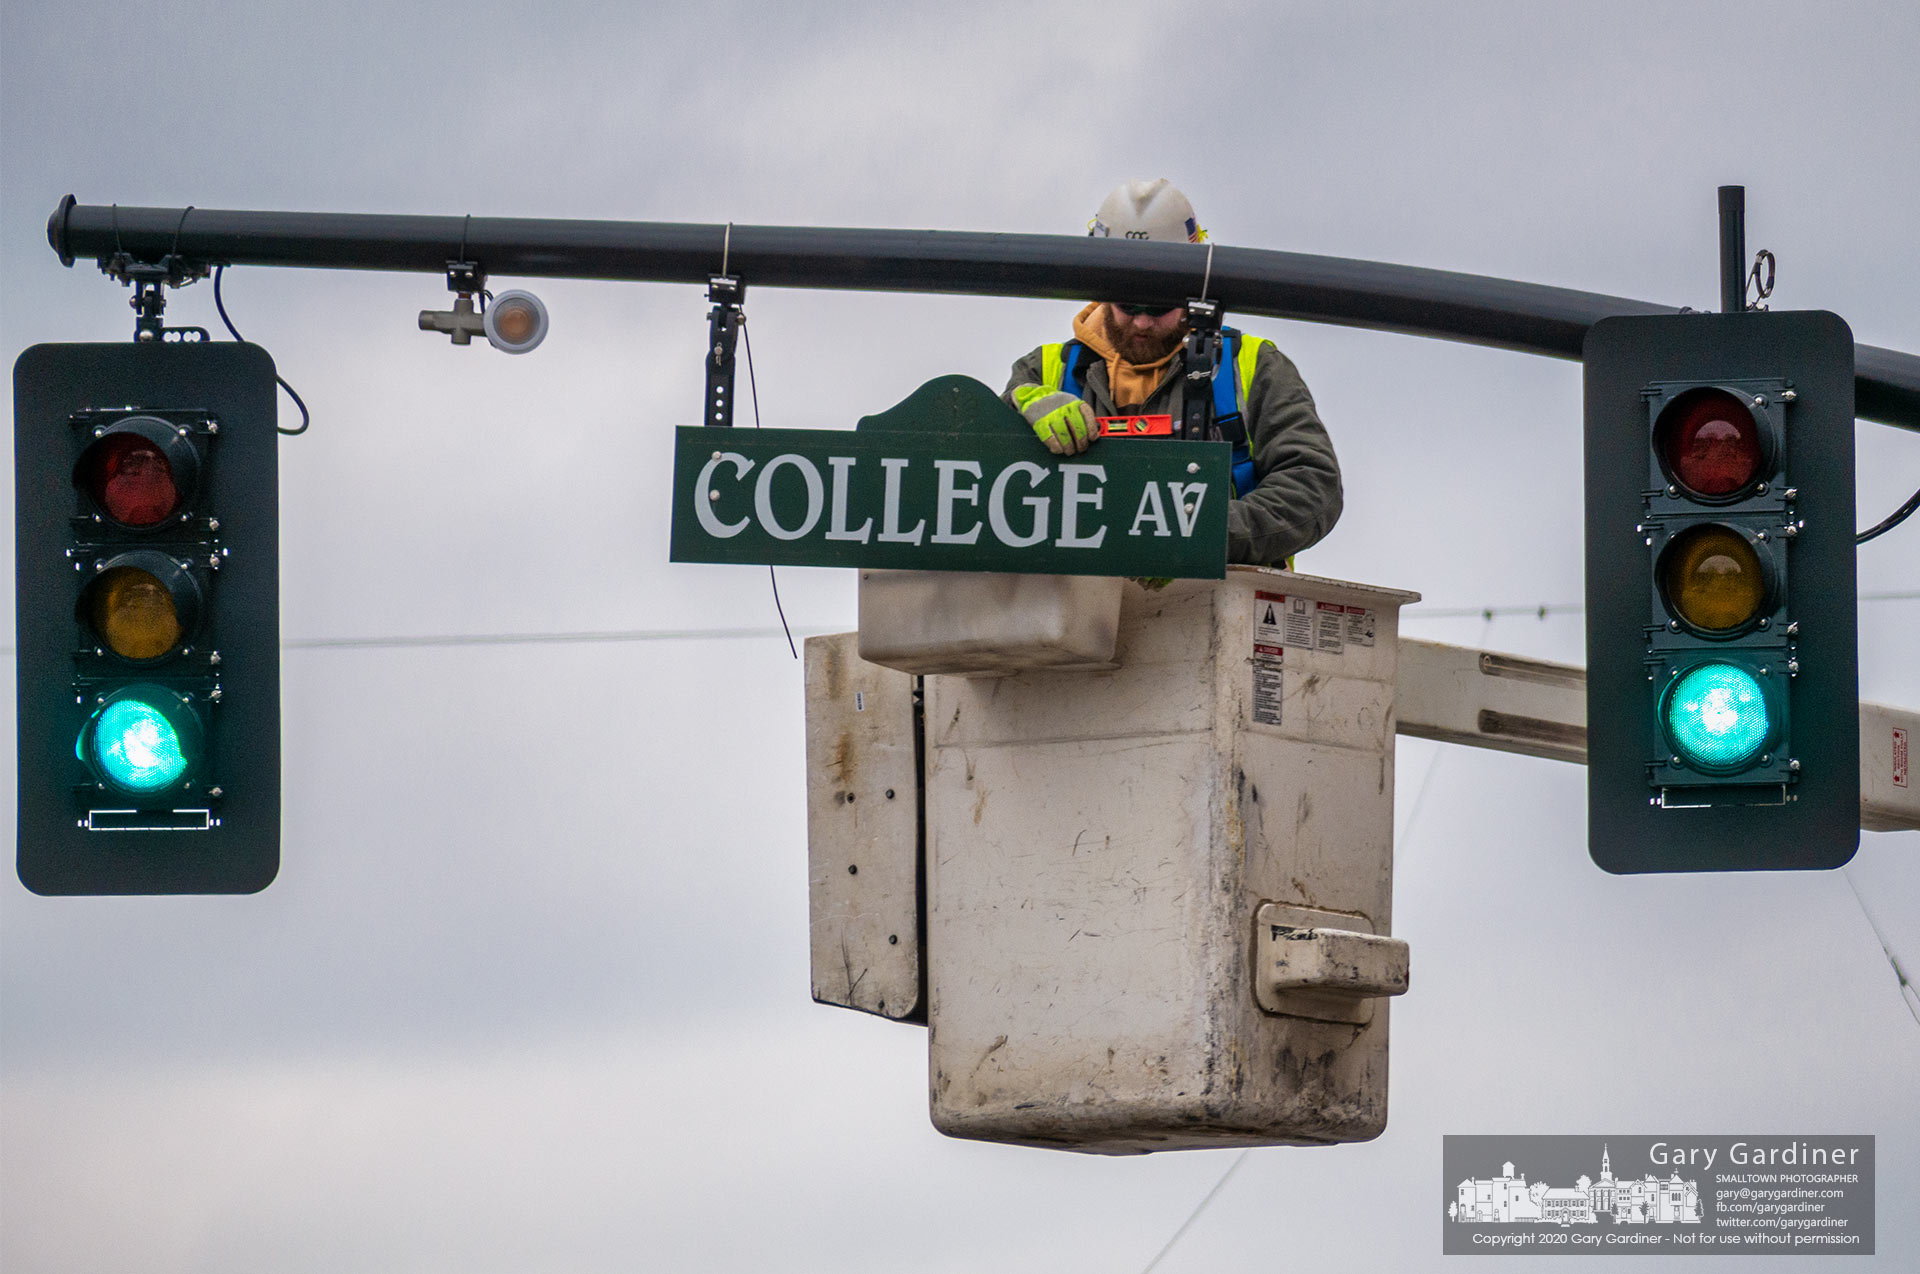 A worker levels the College Ave. street sign after rehanging it as a swinging sign from its previous fixed position on the traffic signal arm. My Final Photo for Jan. 20, 2021.